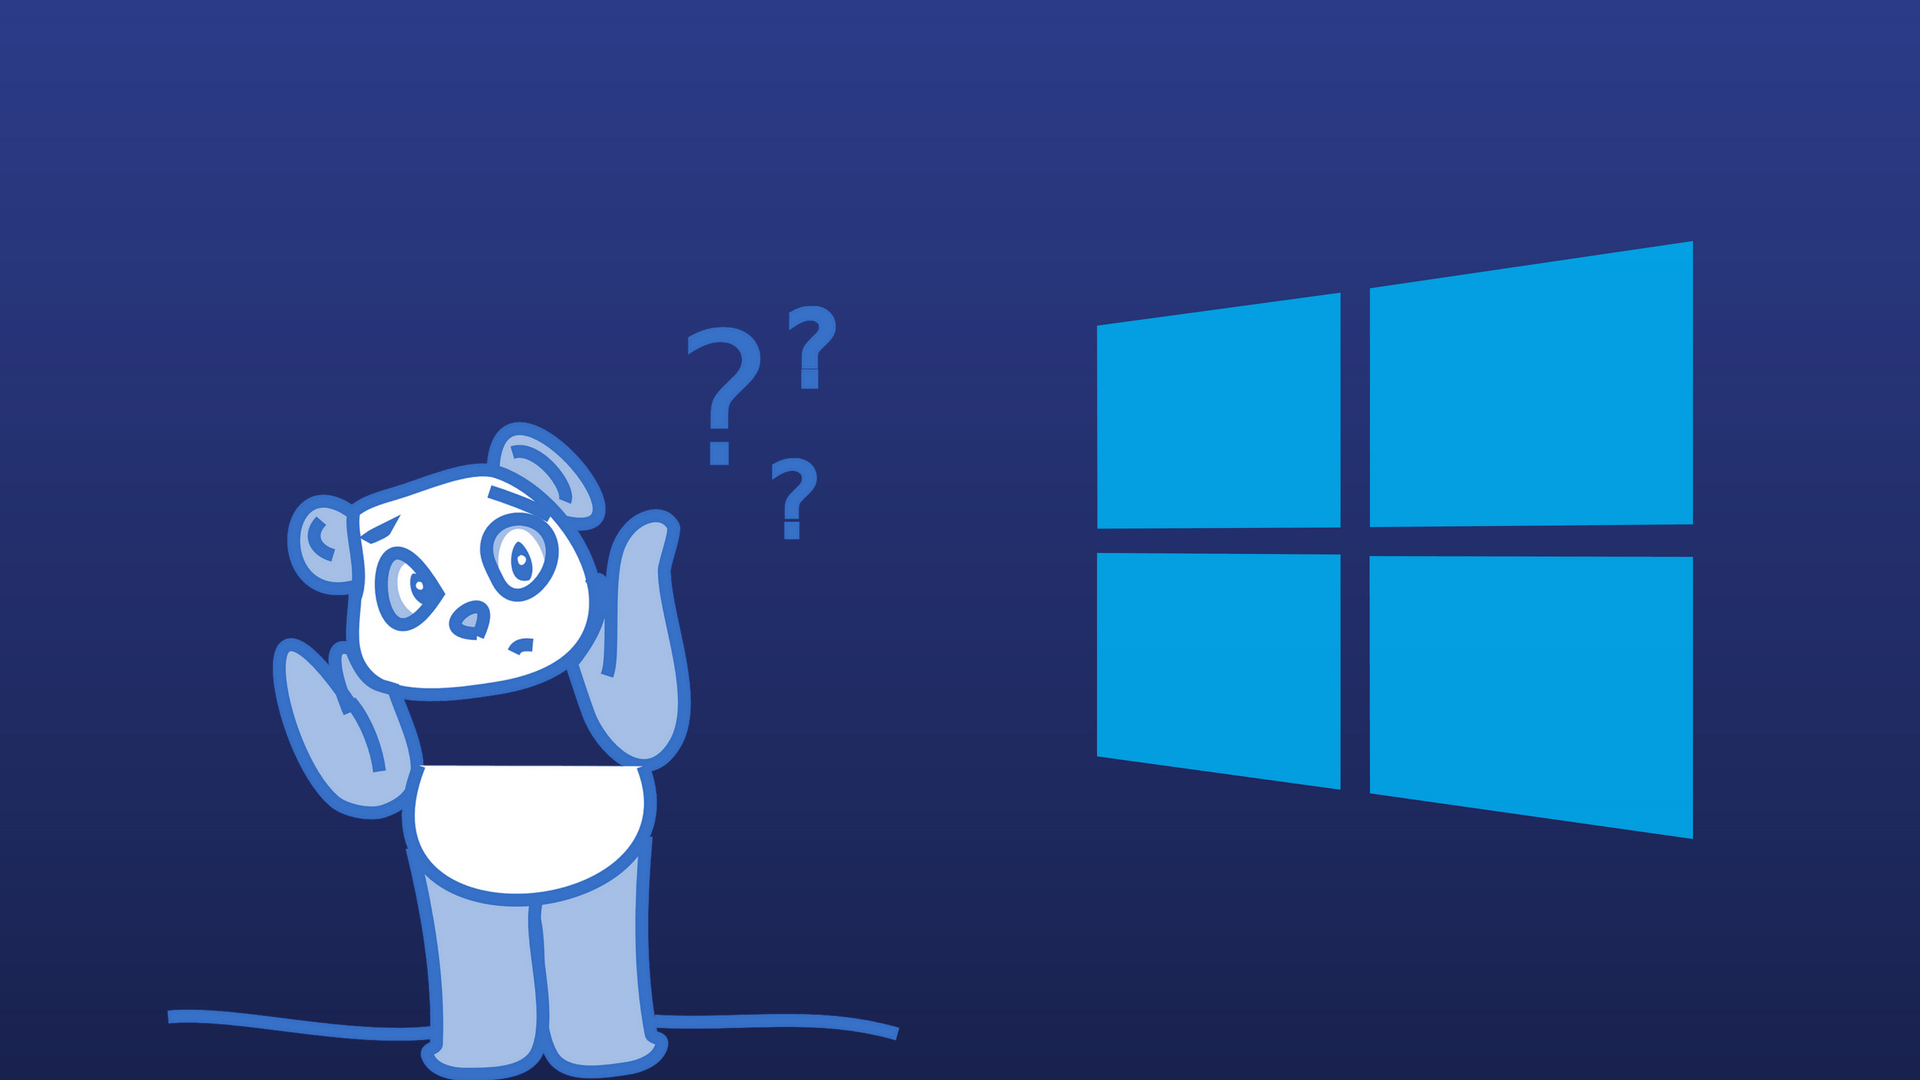 What Windows Do I Have Check Ways To Know Your Windows Version